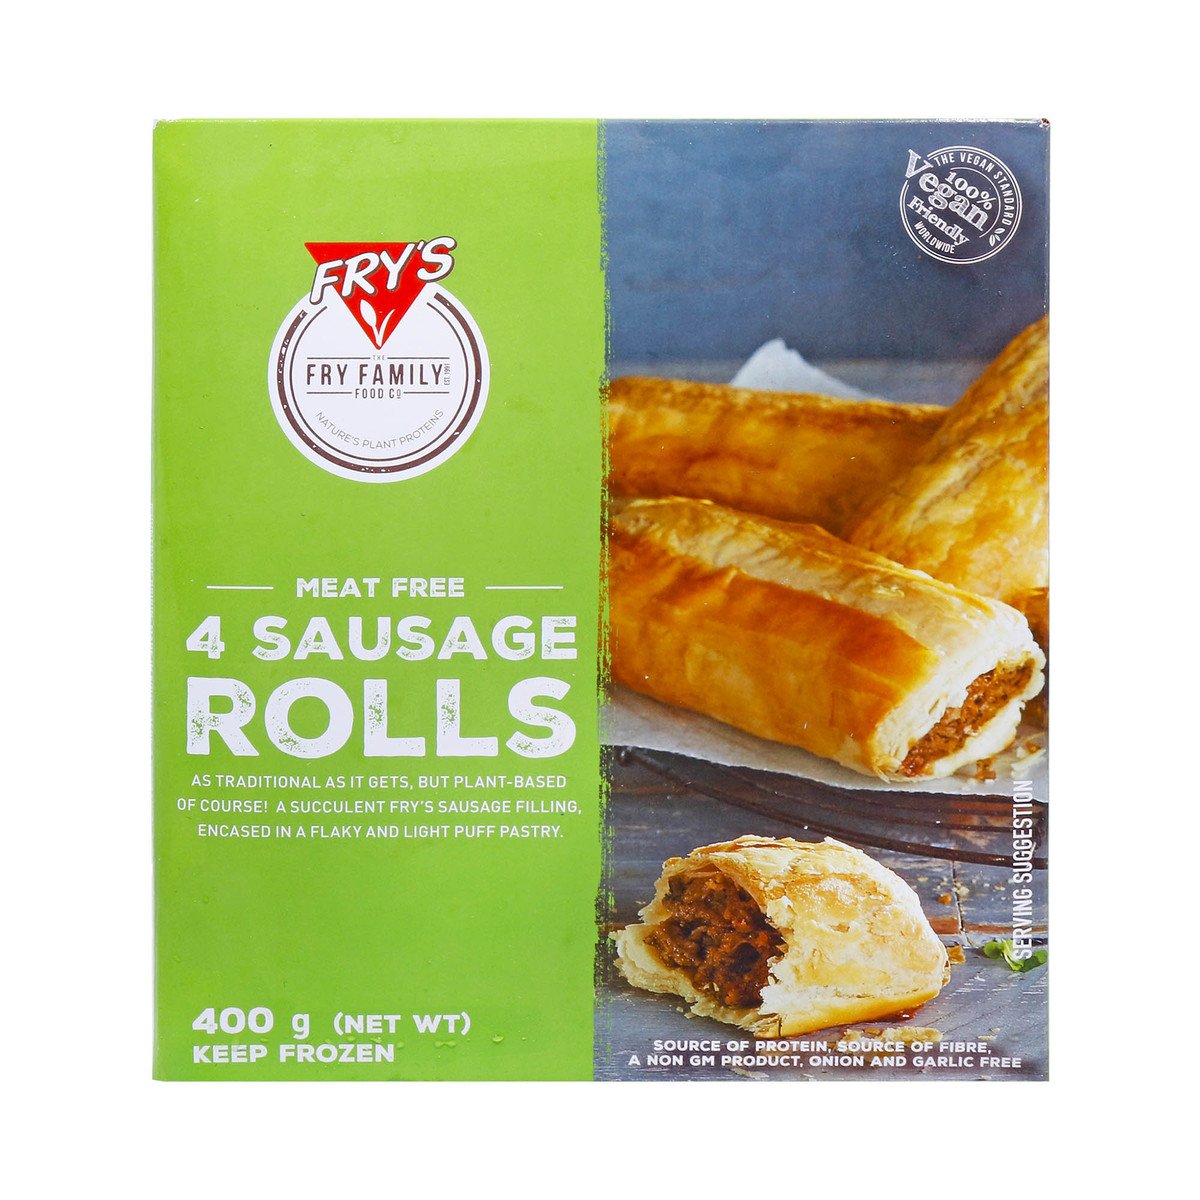 Fry's Family Meat Free 4 Sausage Rolls 400 g